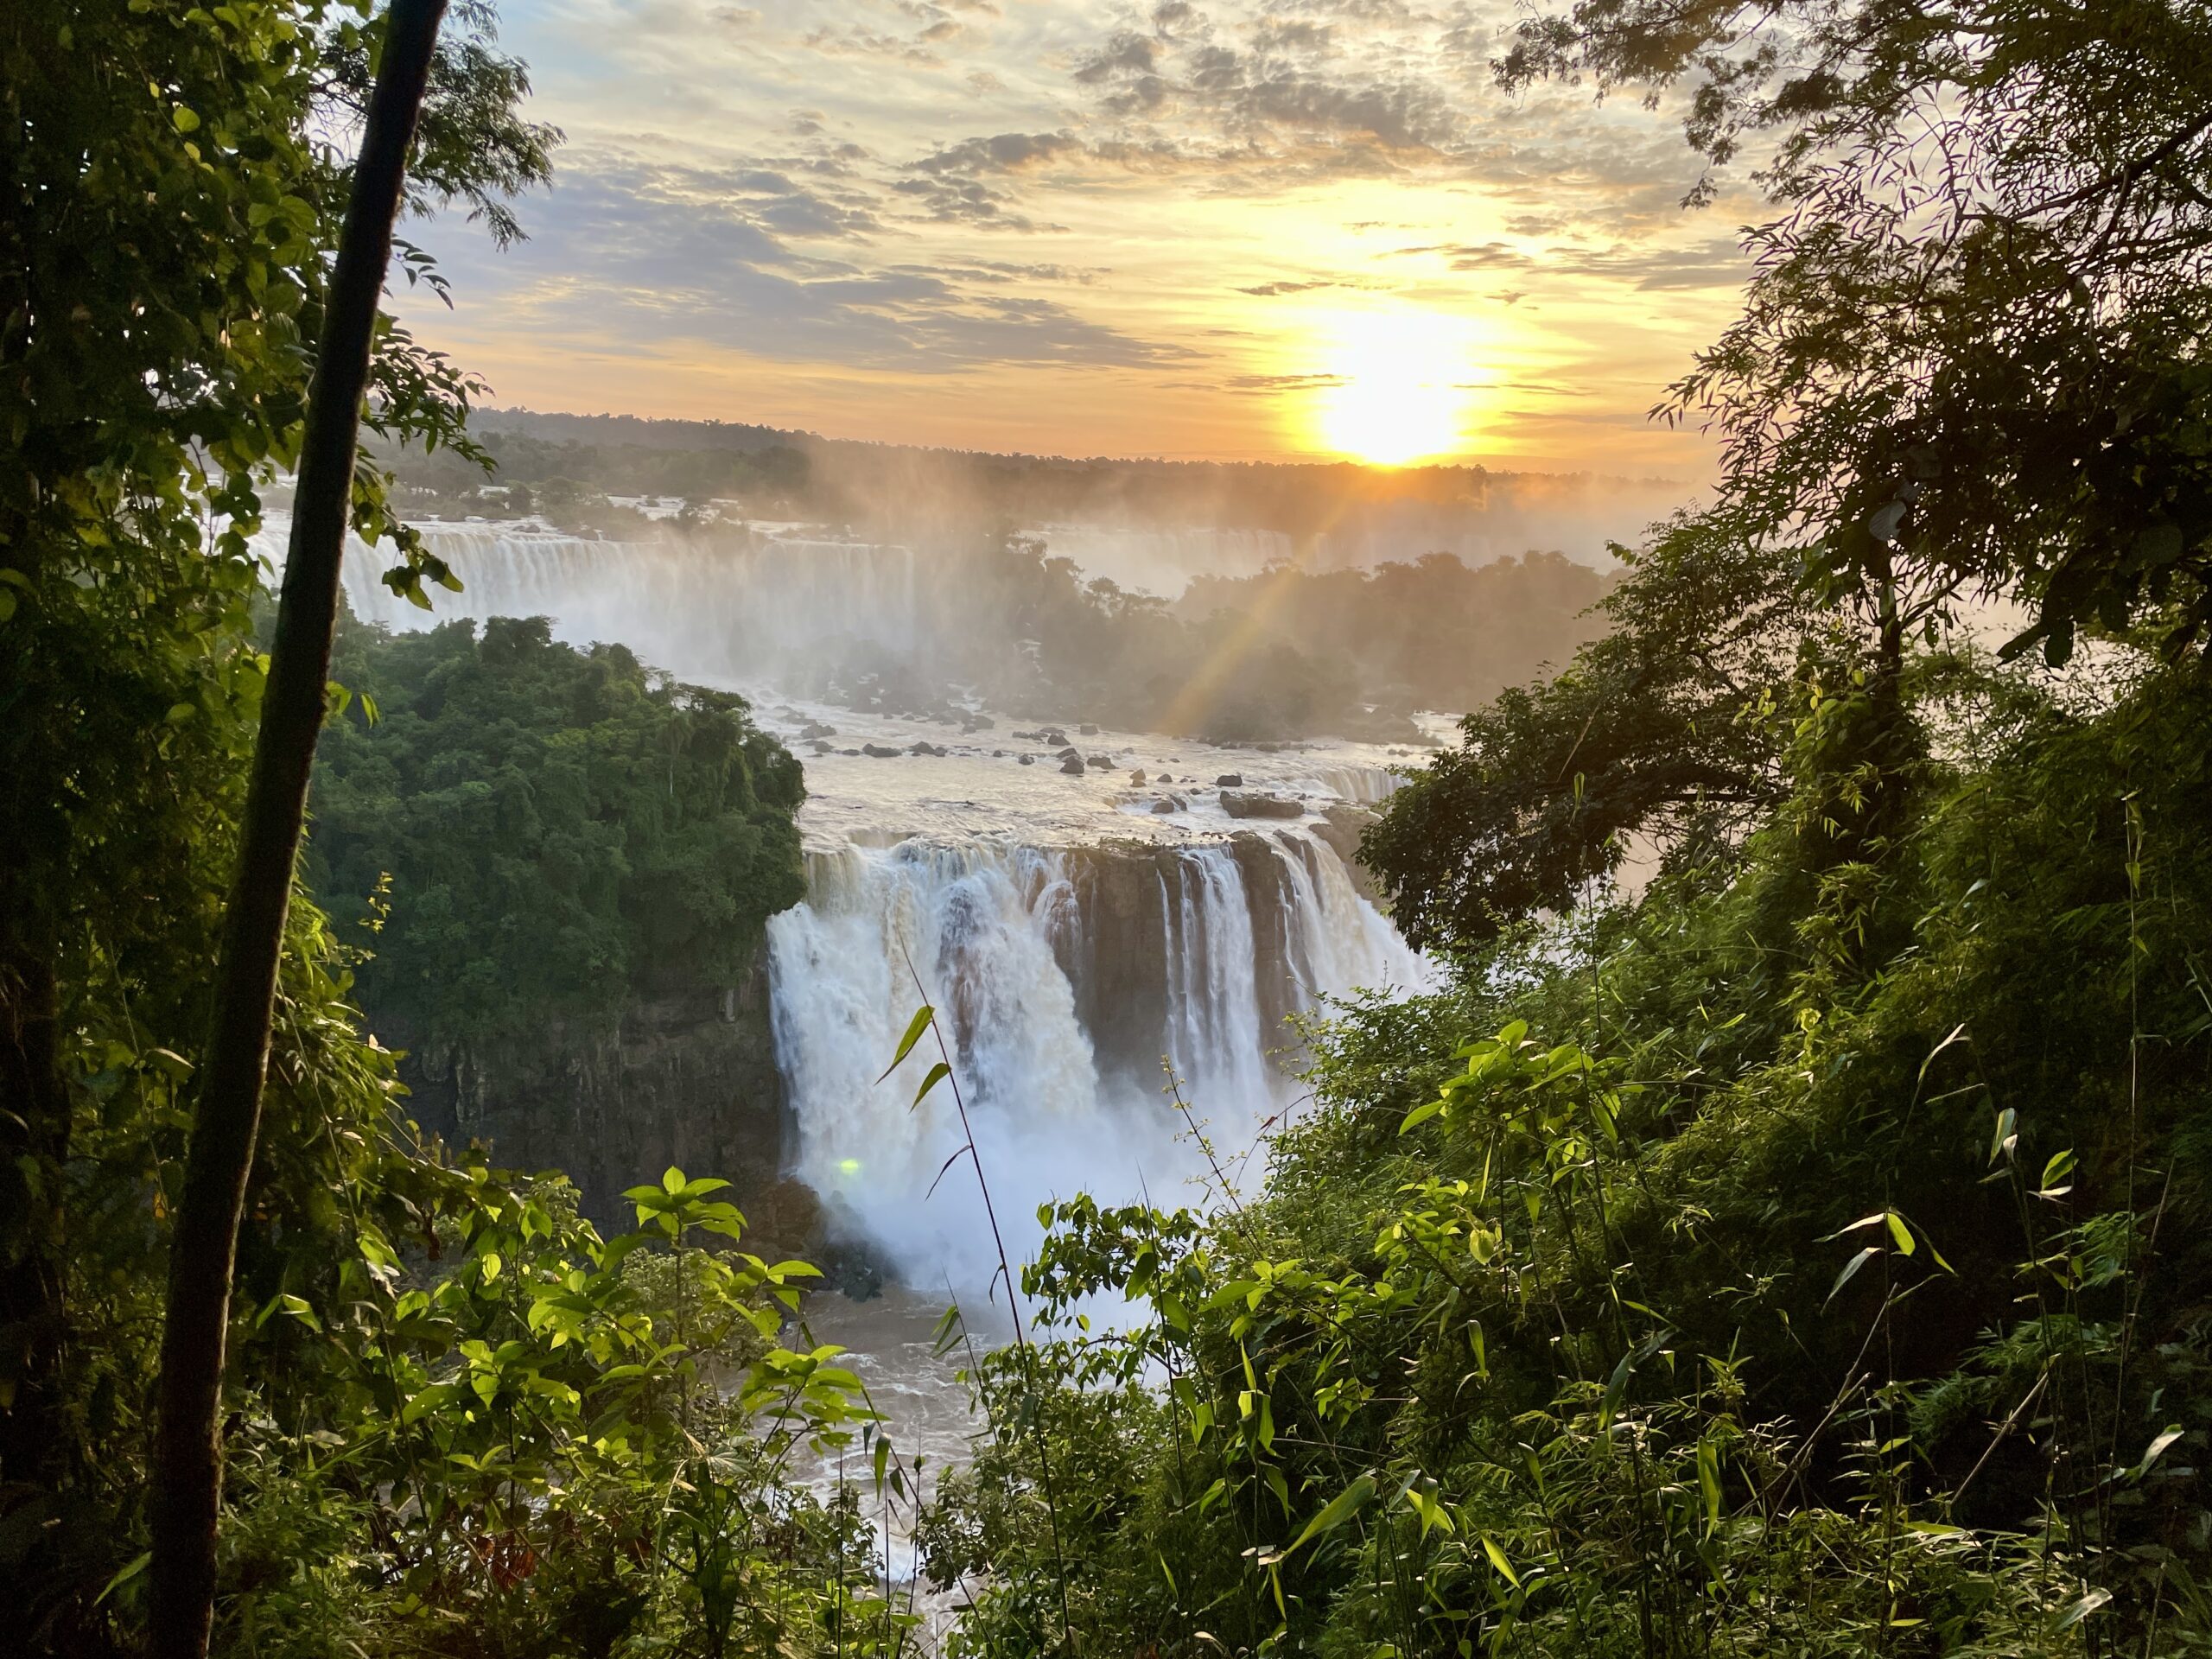 How to Visit Iguazu Falls in Brazil and Argentina